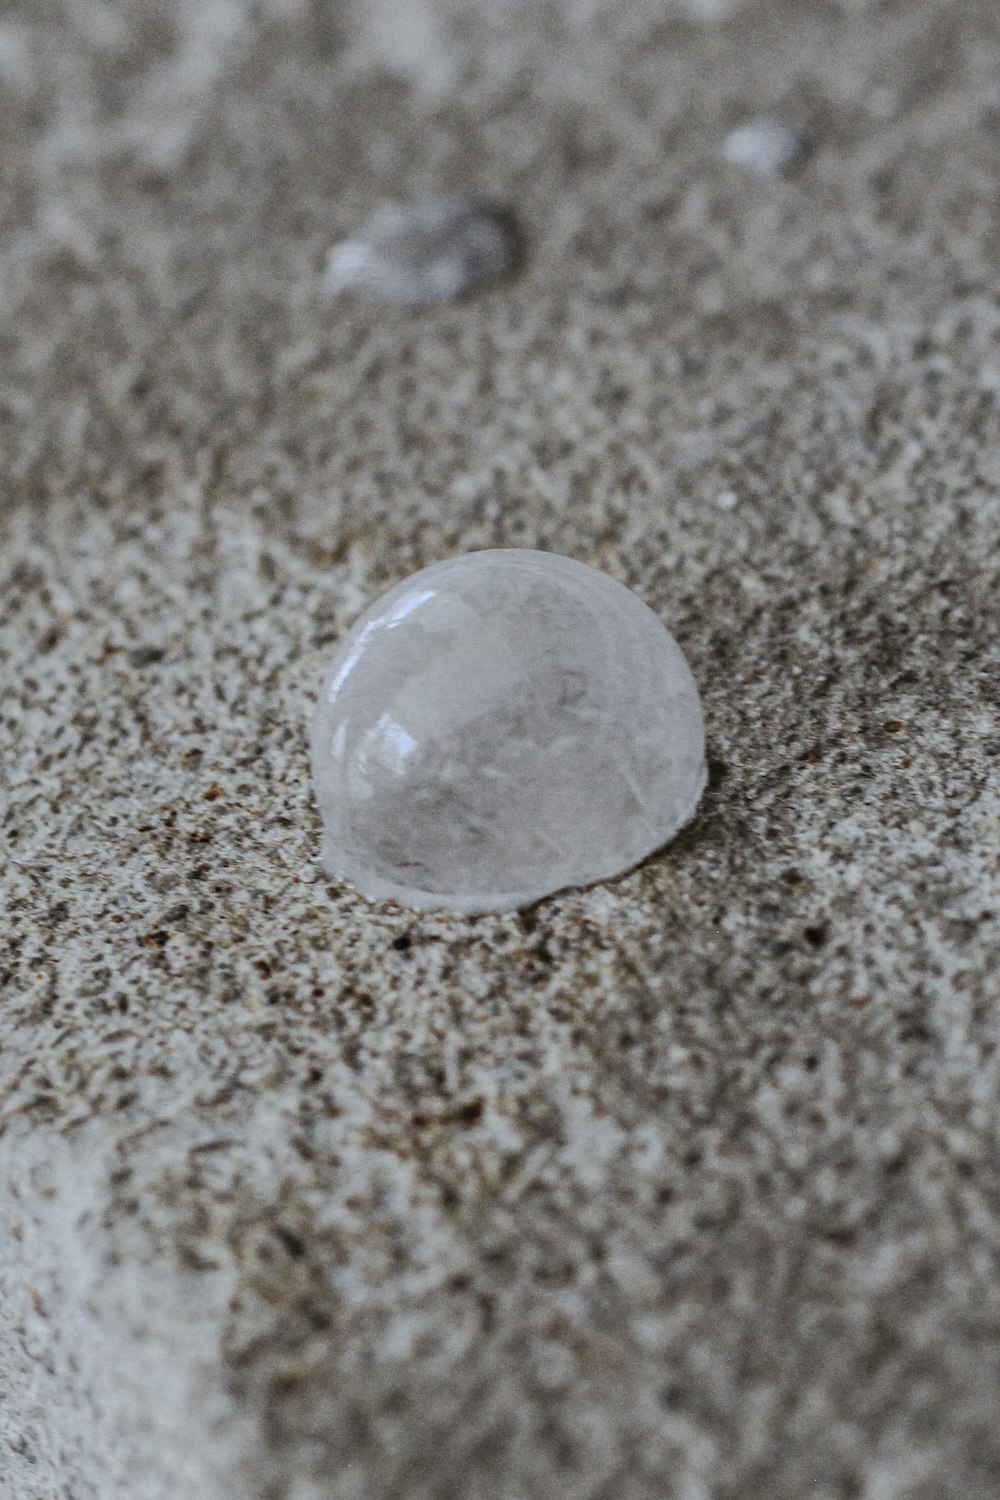 a close up of a small object on the ground